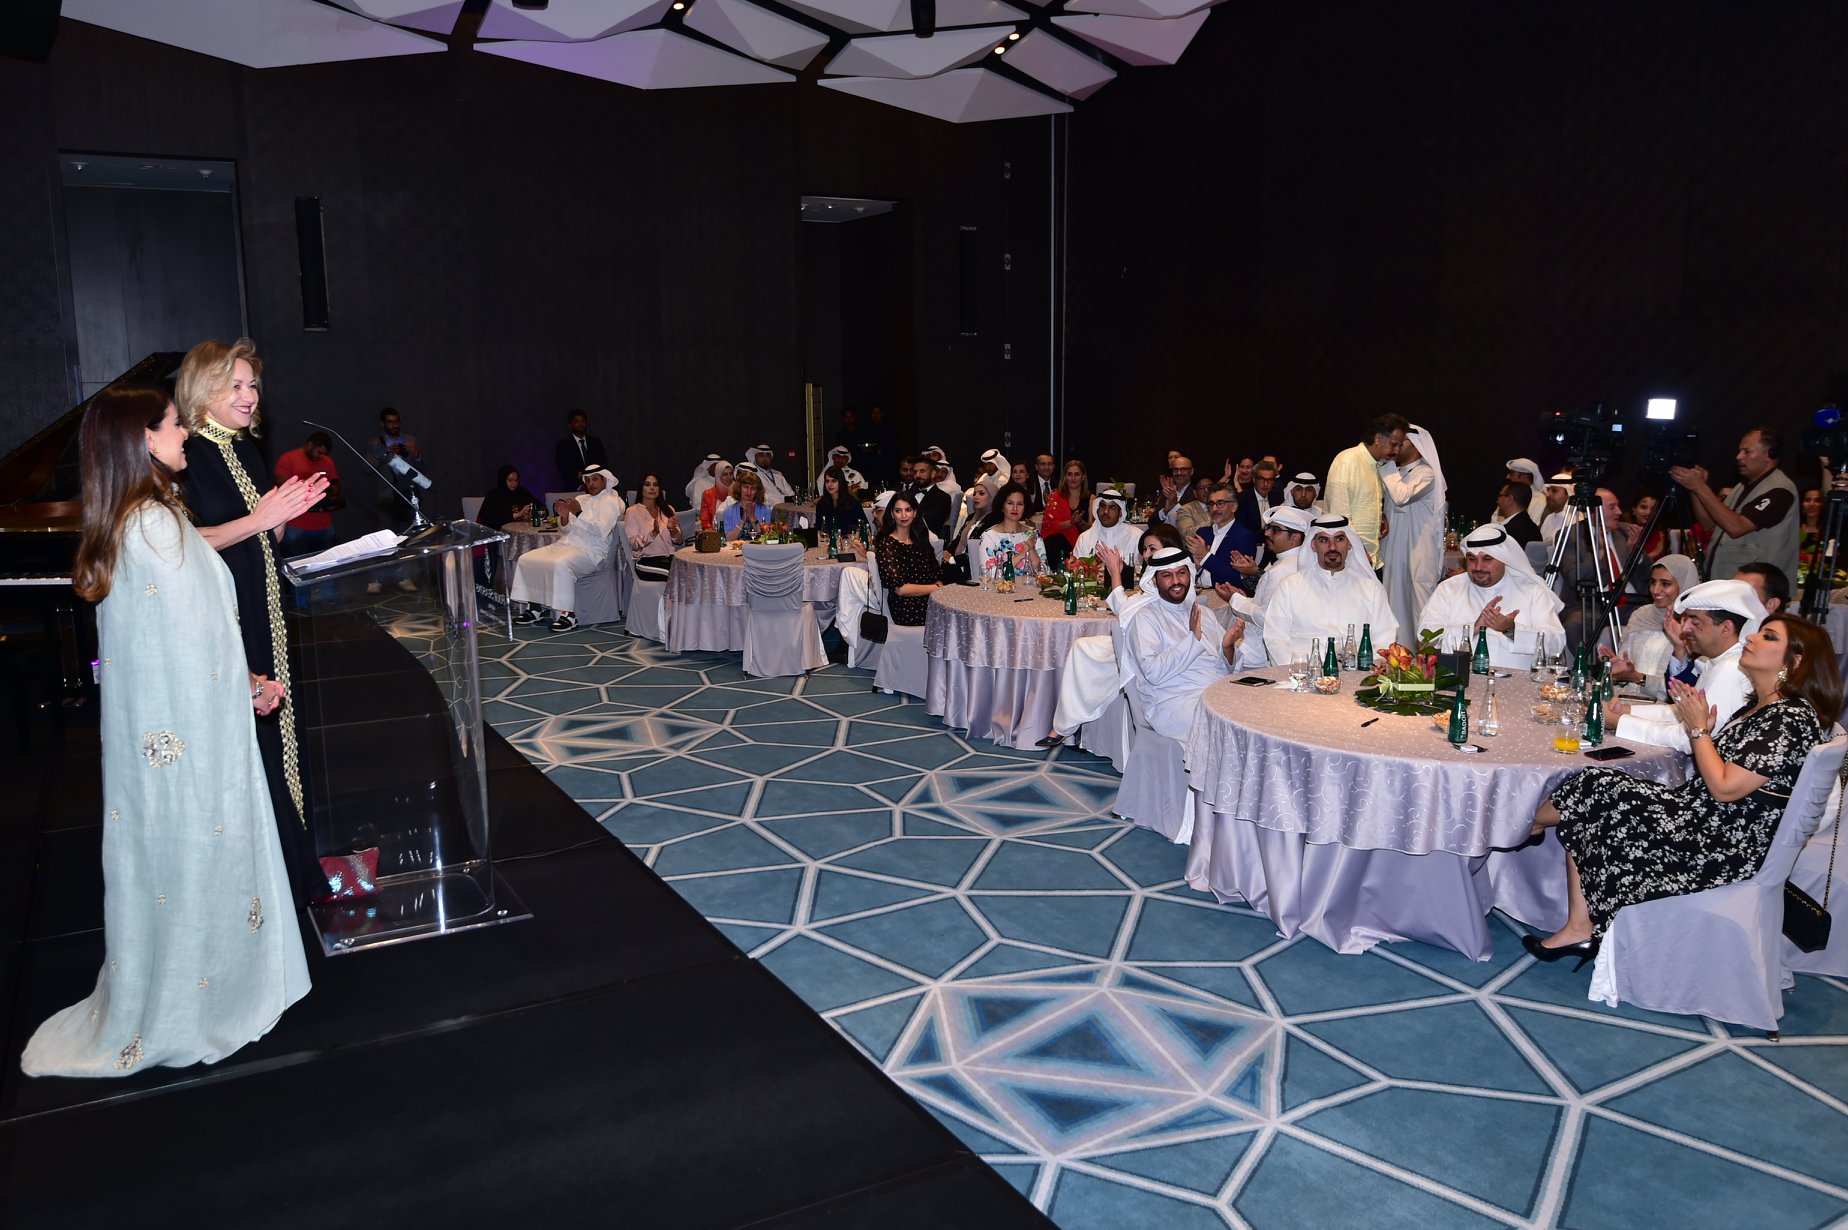 Starting the Gala Dinner at Four Seasons Hotel in Kuwait and celebrating the 63 Inspiring People portrayed in Those Who Inspire Kuwait ©Those Who Inspire